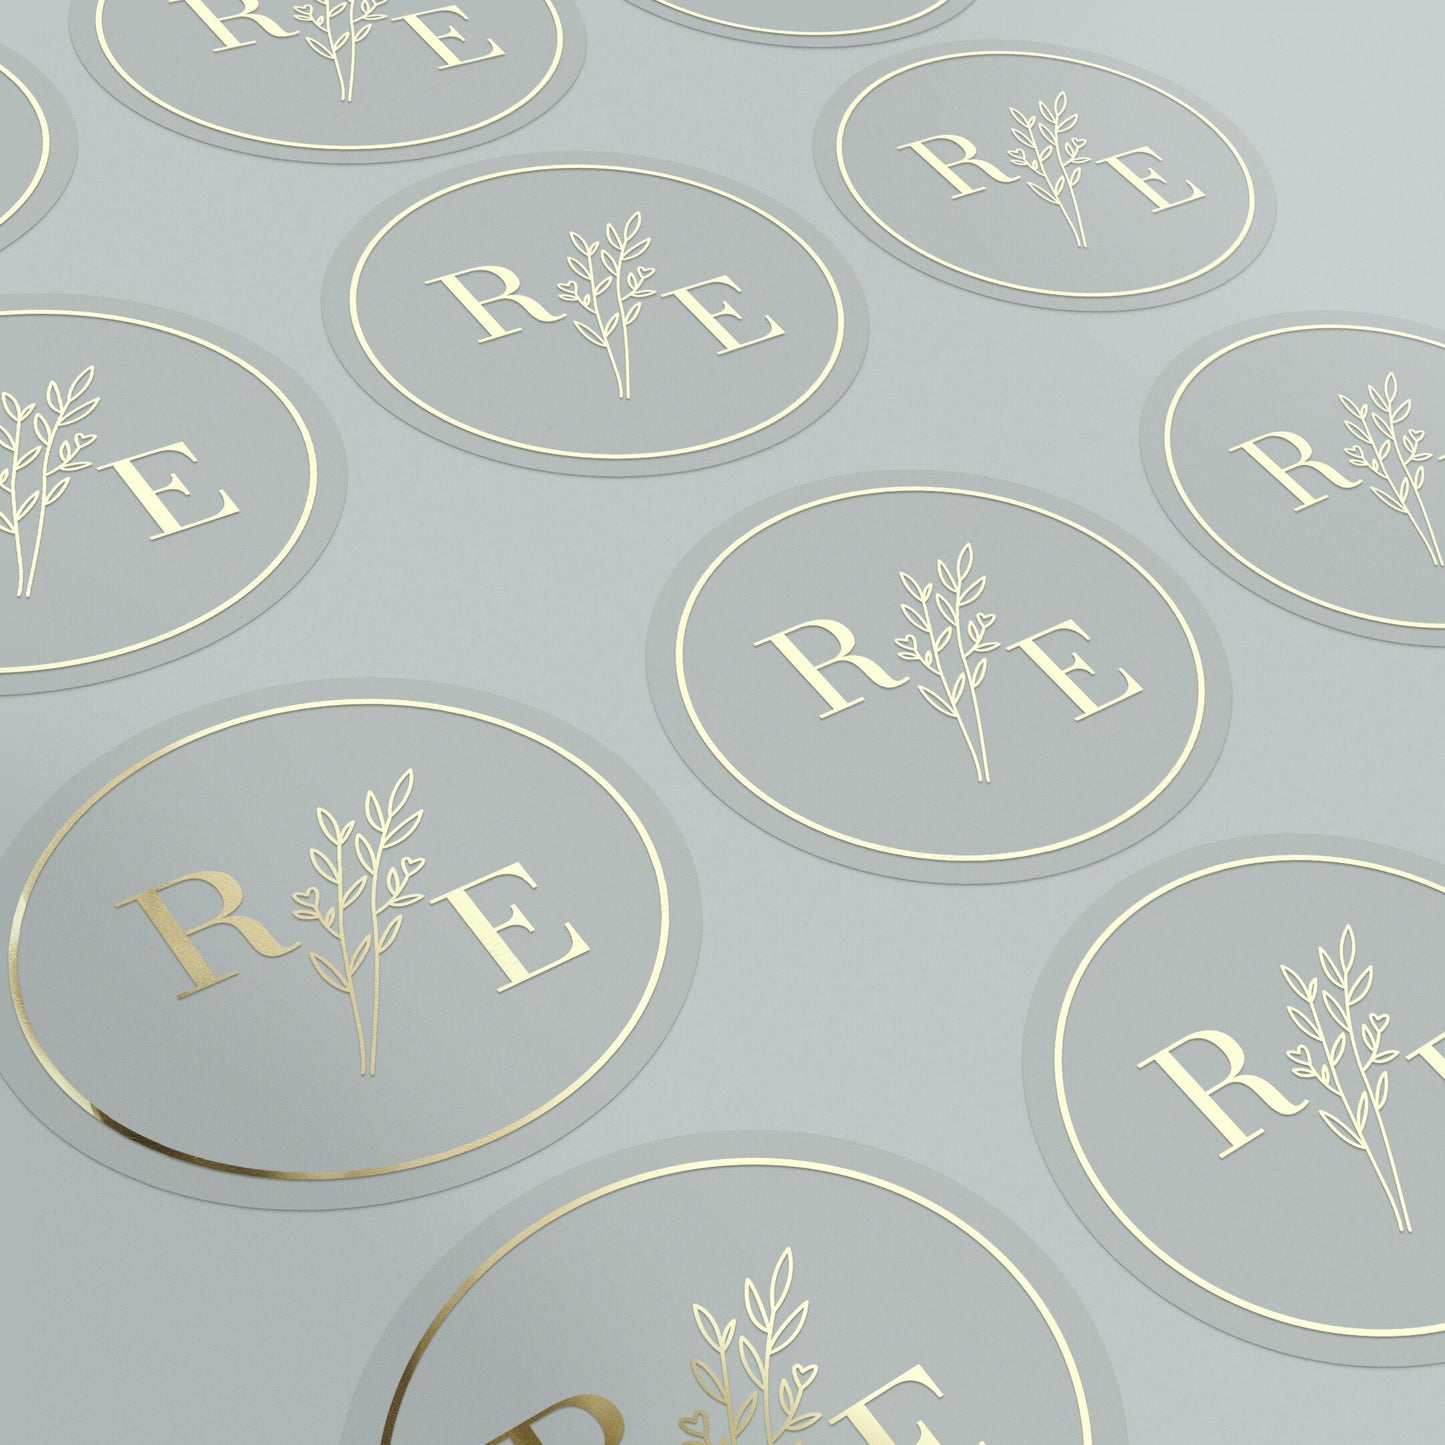 Clear custom wedding sticker with golden initials and botanical illustration.